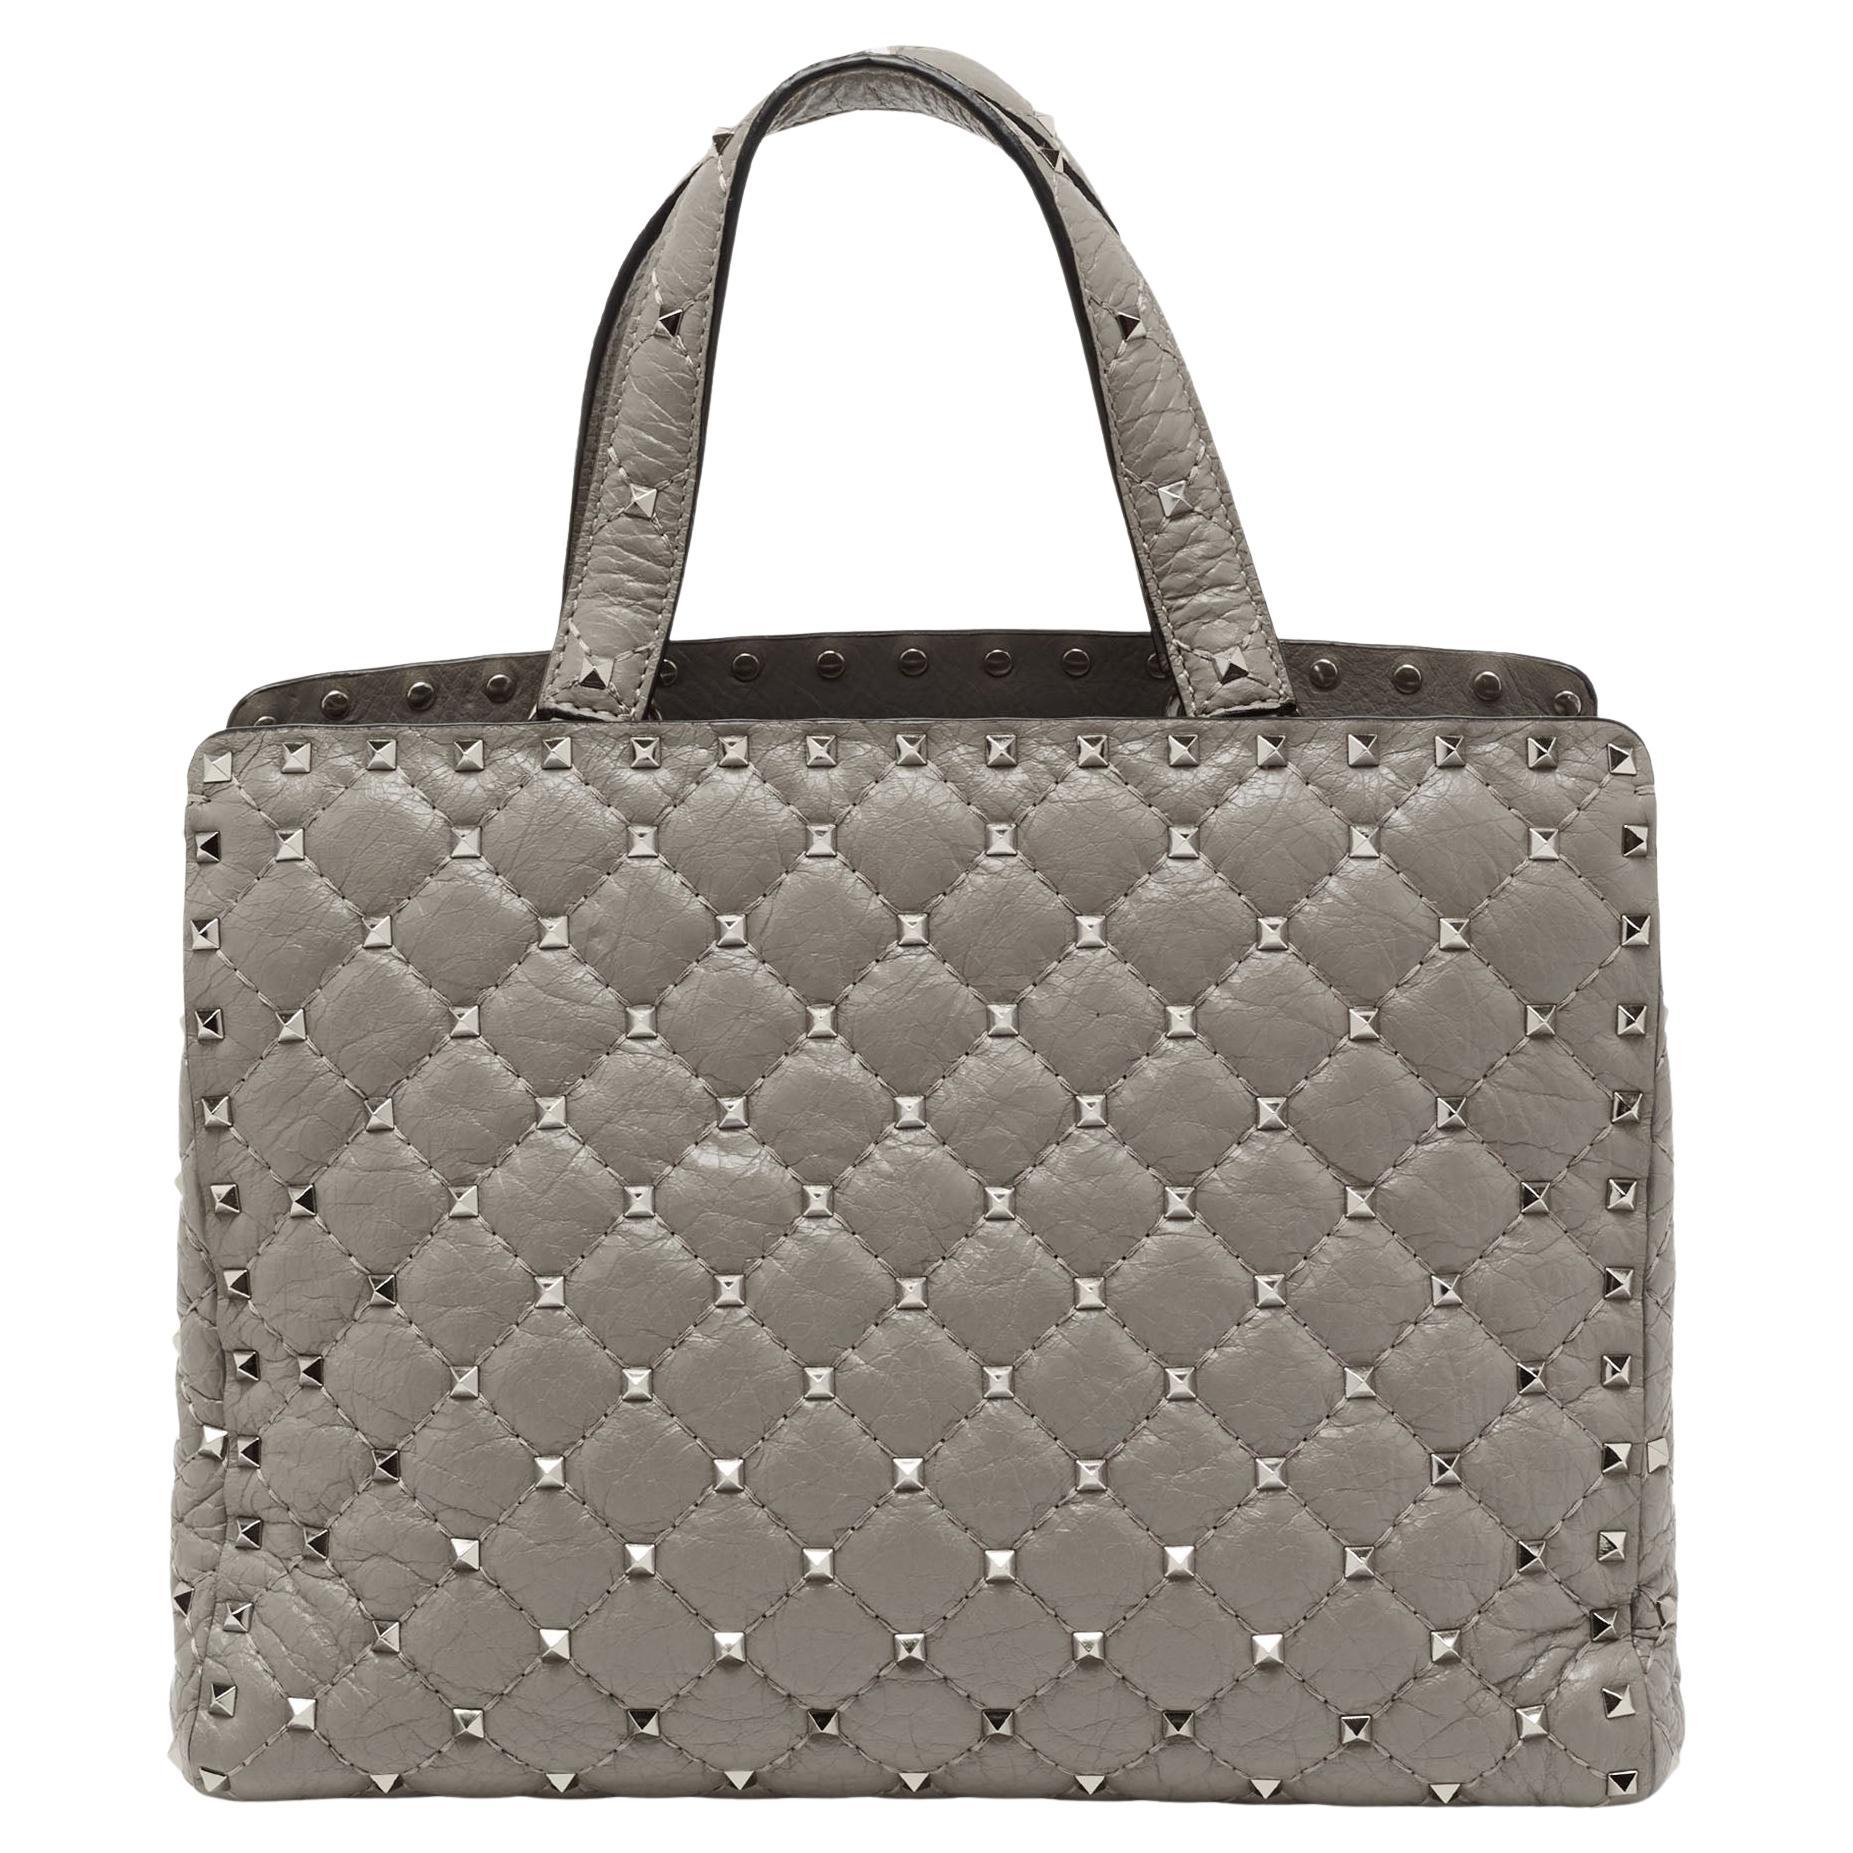 Valentino Grey Quilted Leather Rockstud Tote